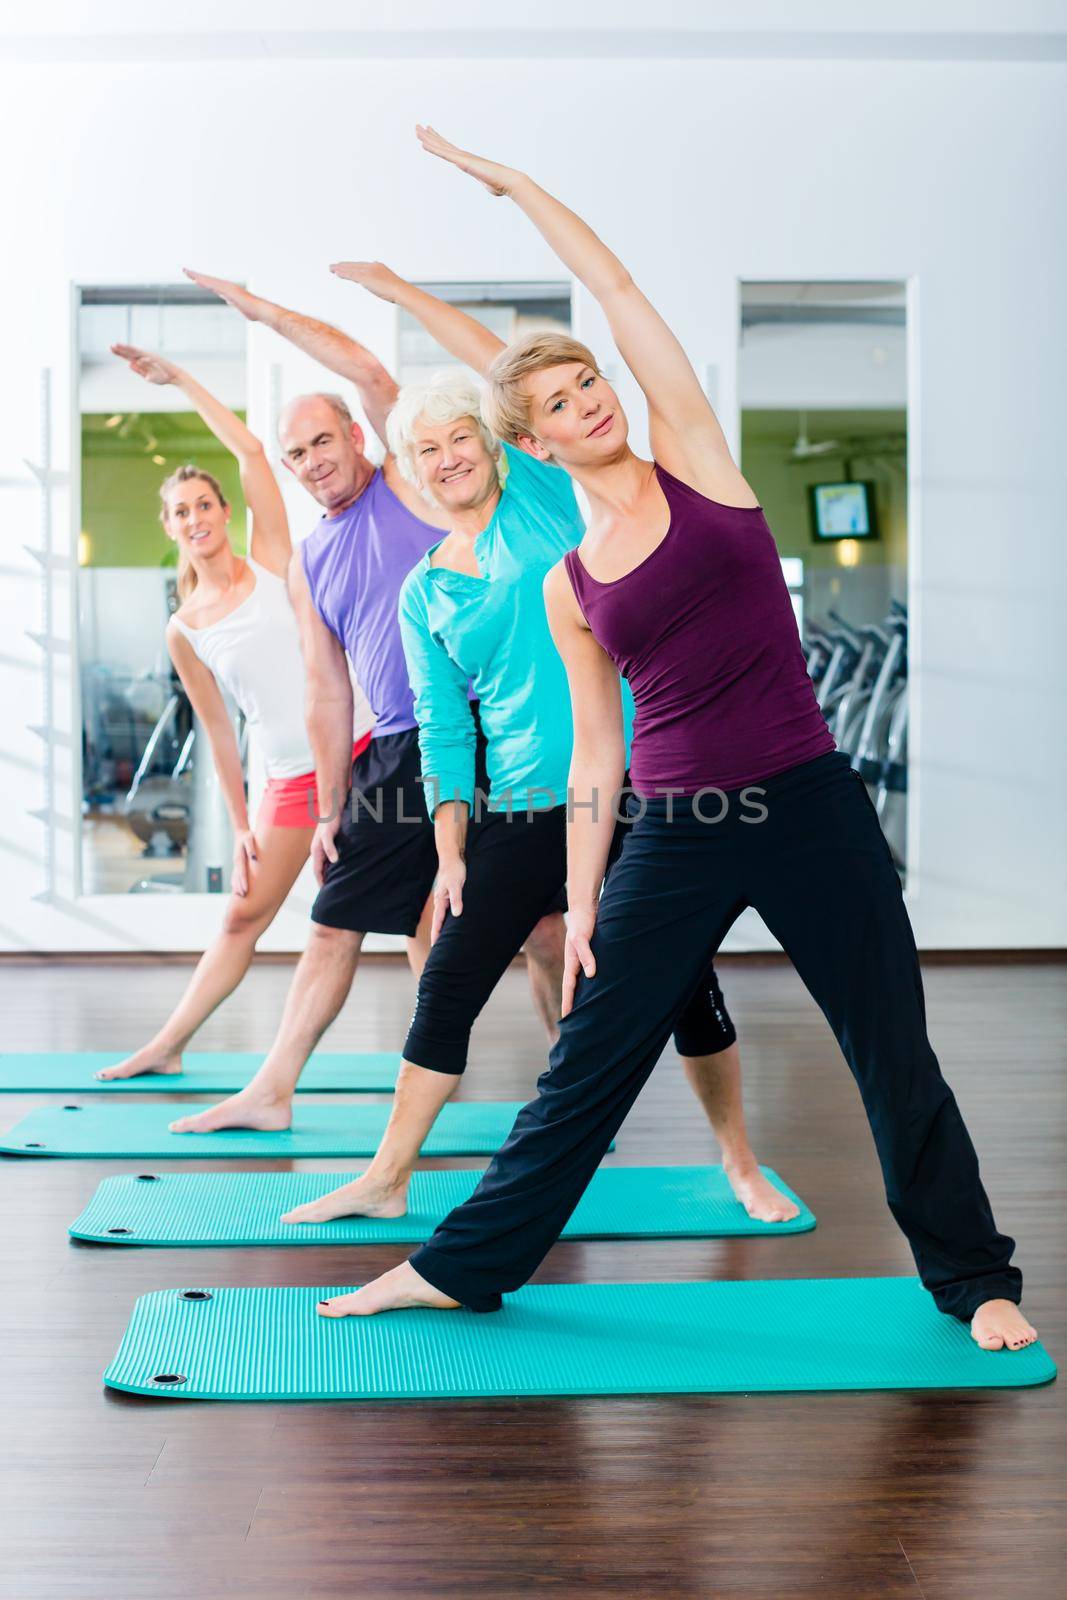 Group of senior people and young woman and men in fitness gym doing gymnastics